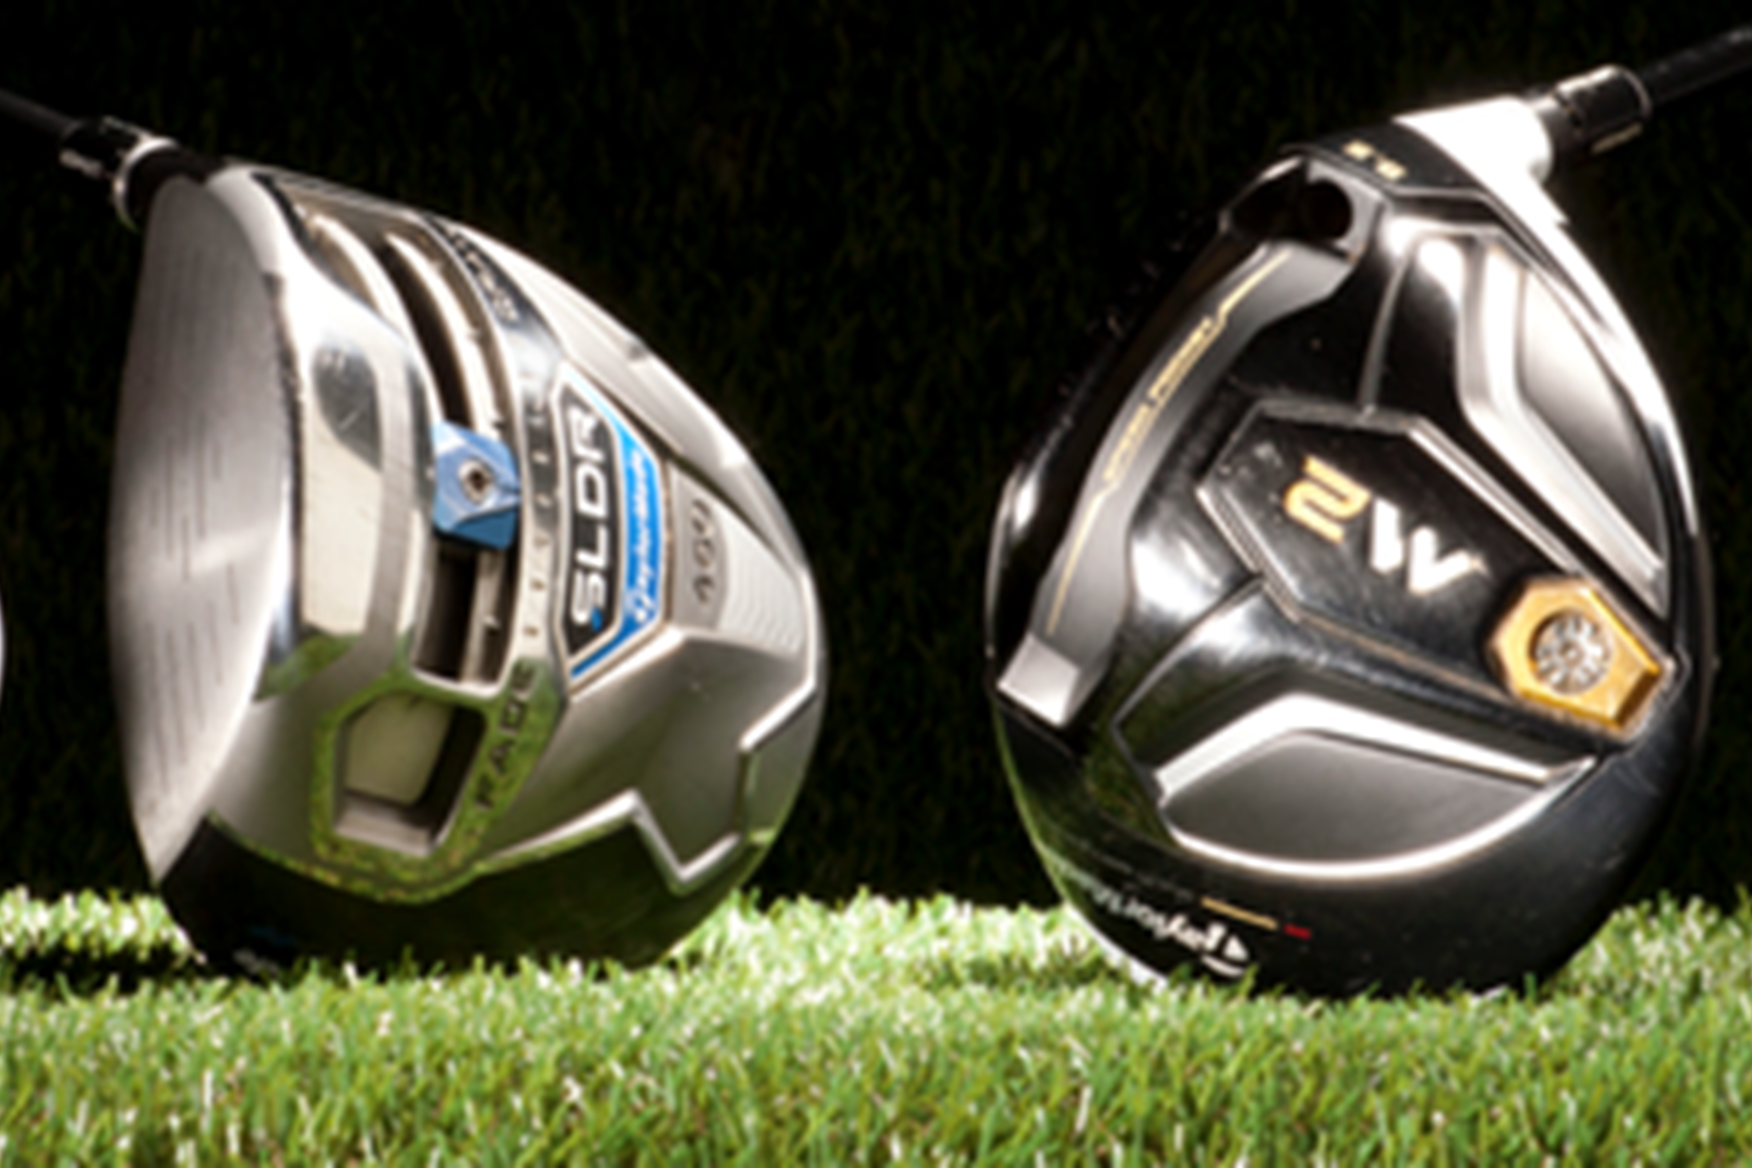 taylormade sldr vs. rbz stage 2 driver review